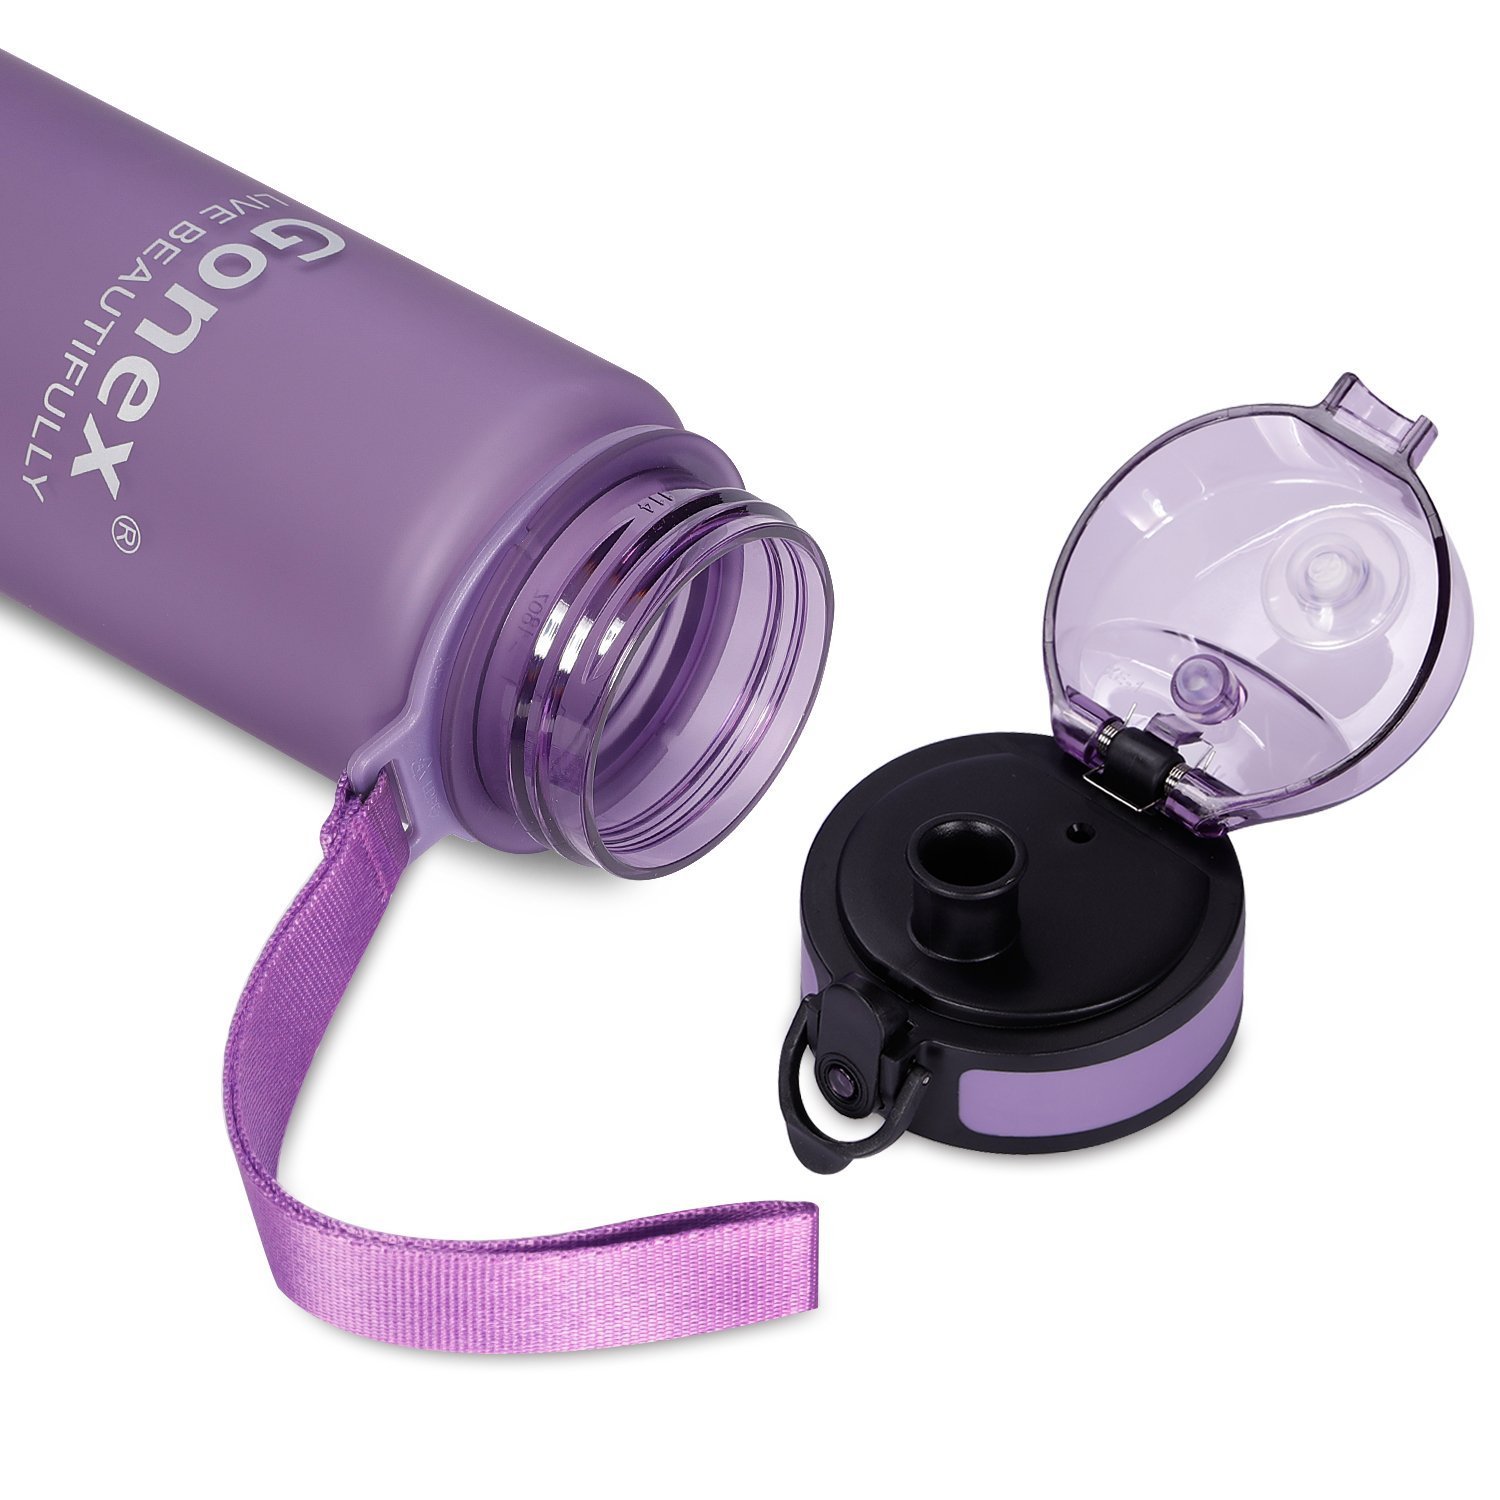 Gonex sports water bottle with flip top lid for $6